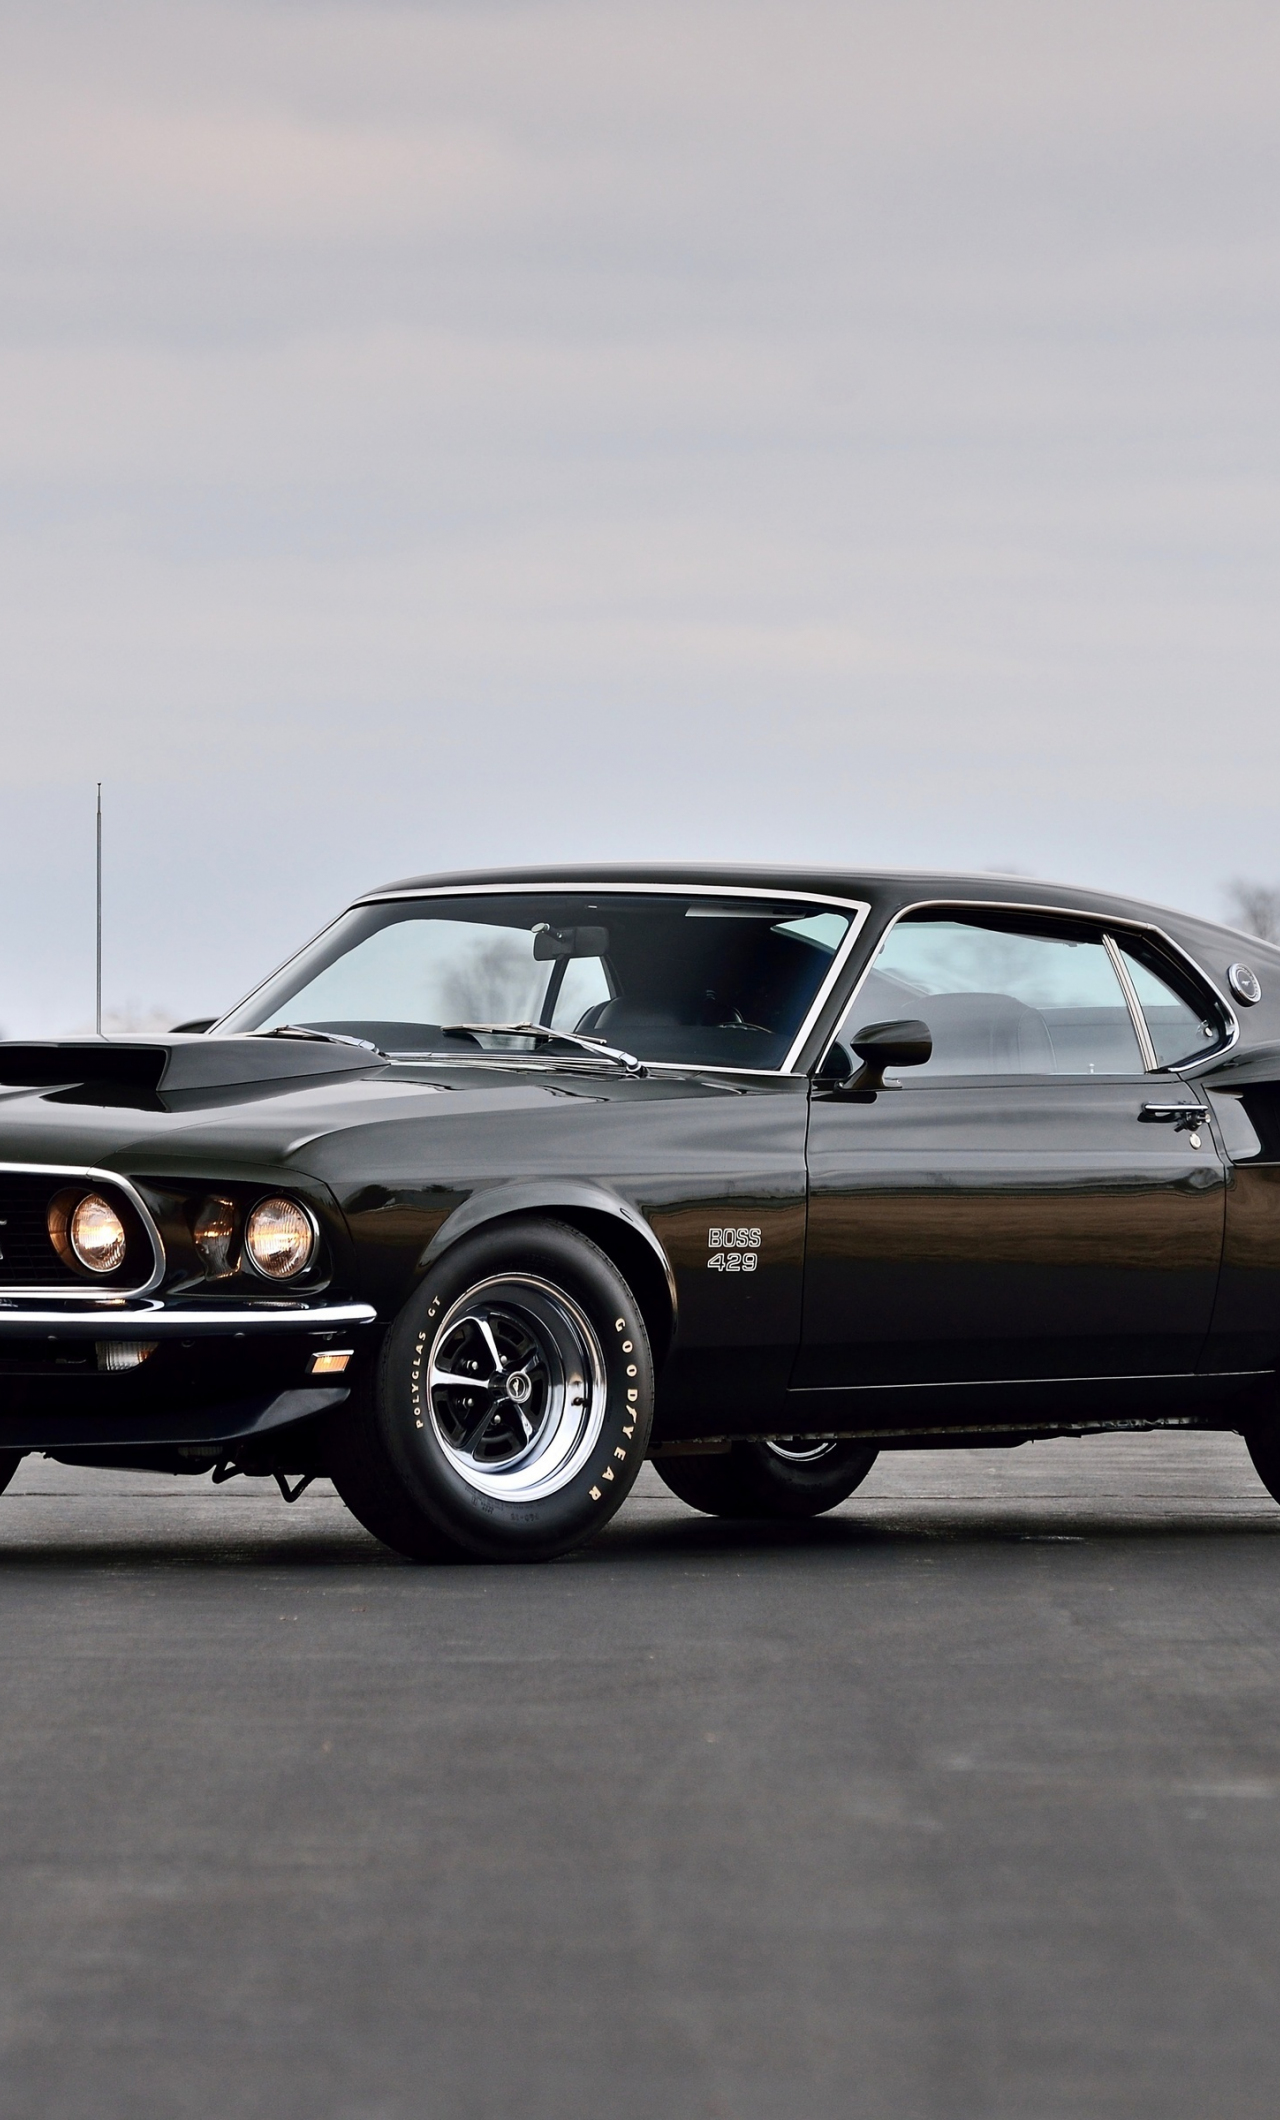 Download wallpaper 1280x2120 on road, 1969 ford mustang boss 429, black,  muscle car, iphone 6 plus, 1280x2120 hd background, 9819